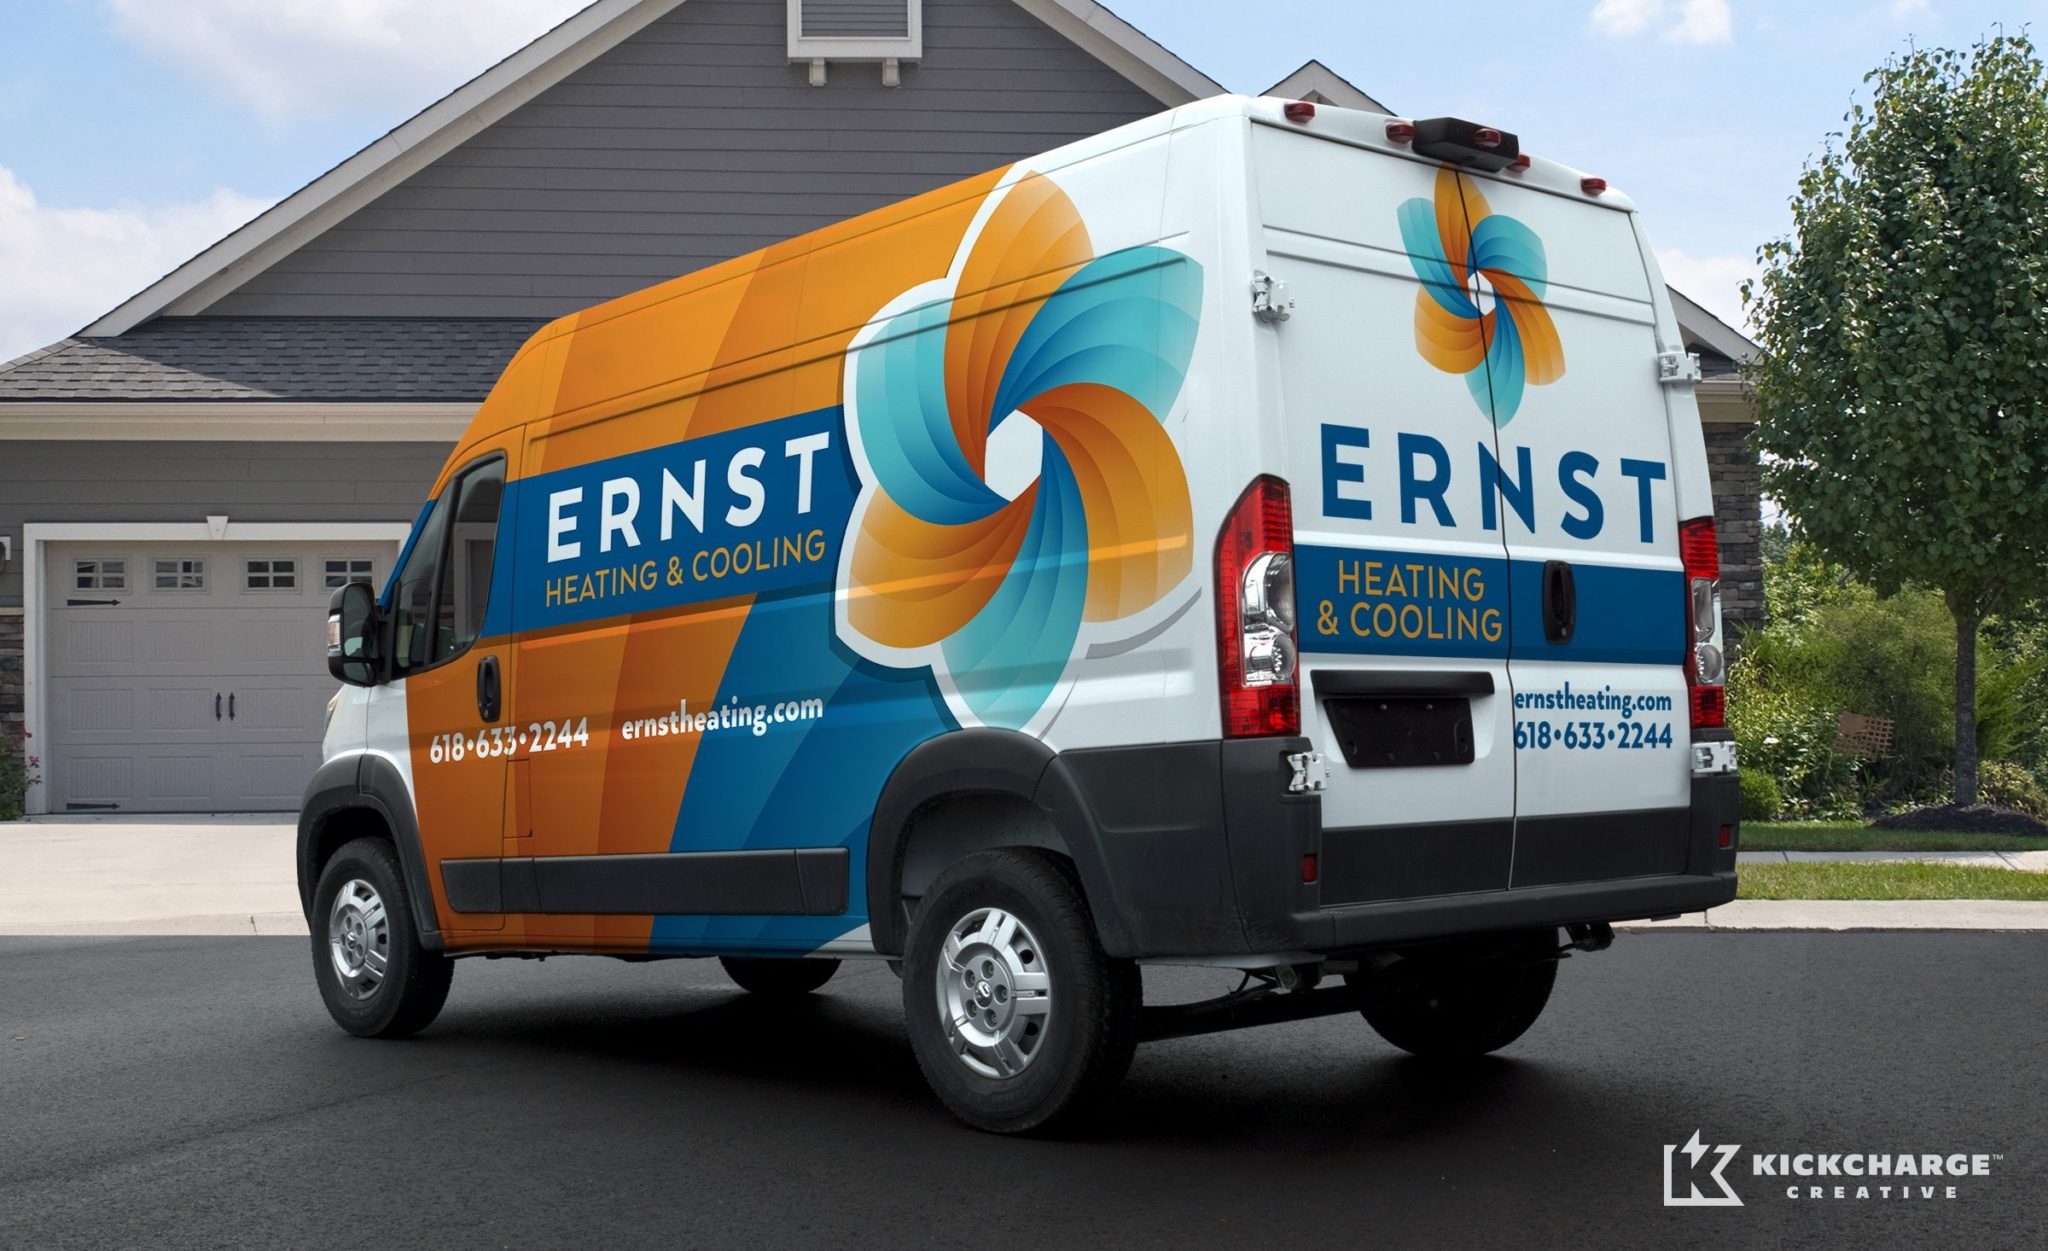 Fleet branding, and HVAC logo design for this Illinois-based heating and air conditioning company.